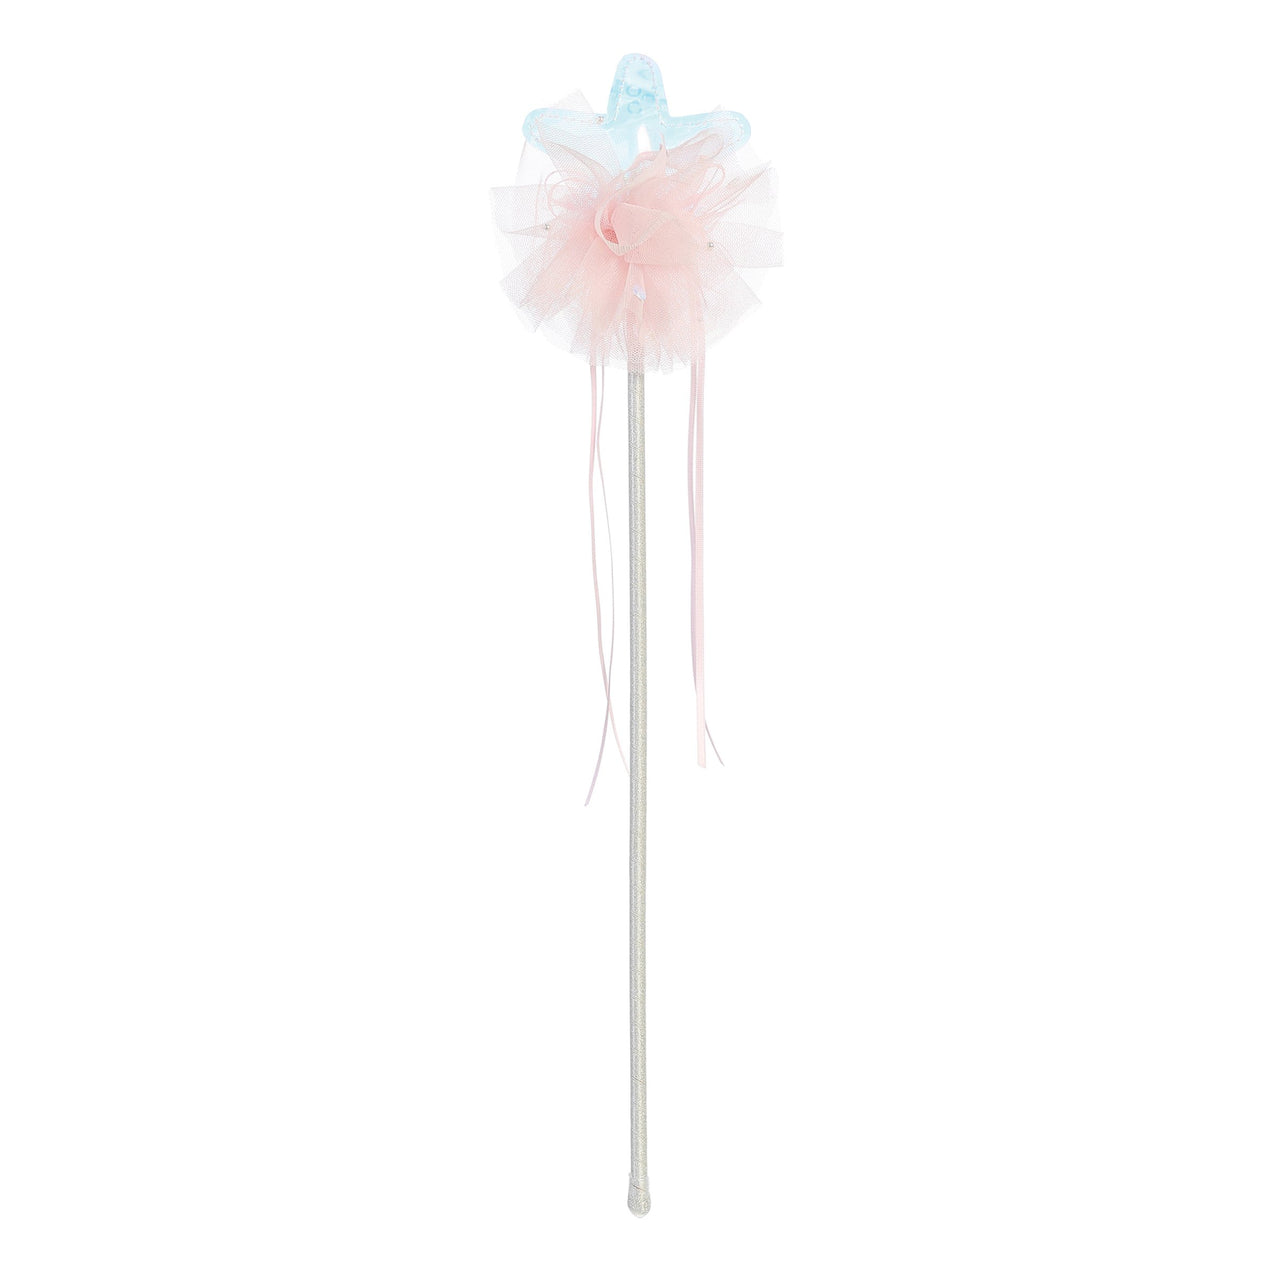 Under the Sea Tulle Wand with Large Iridescent Sea Animal Accent